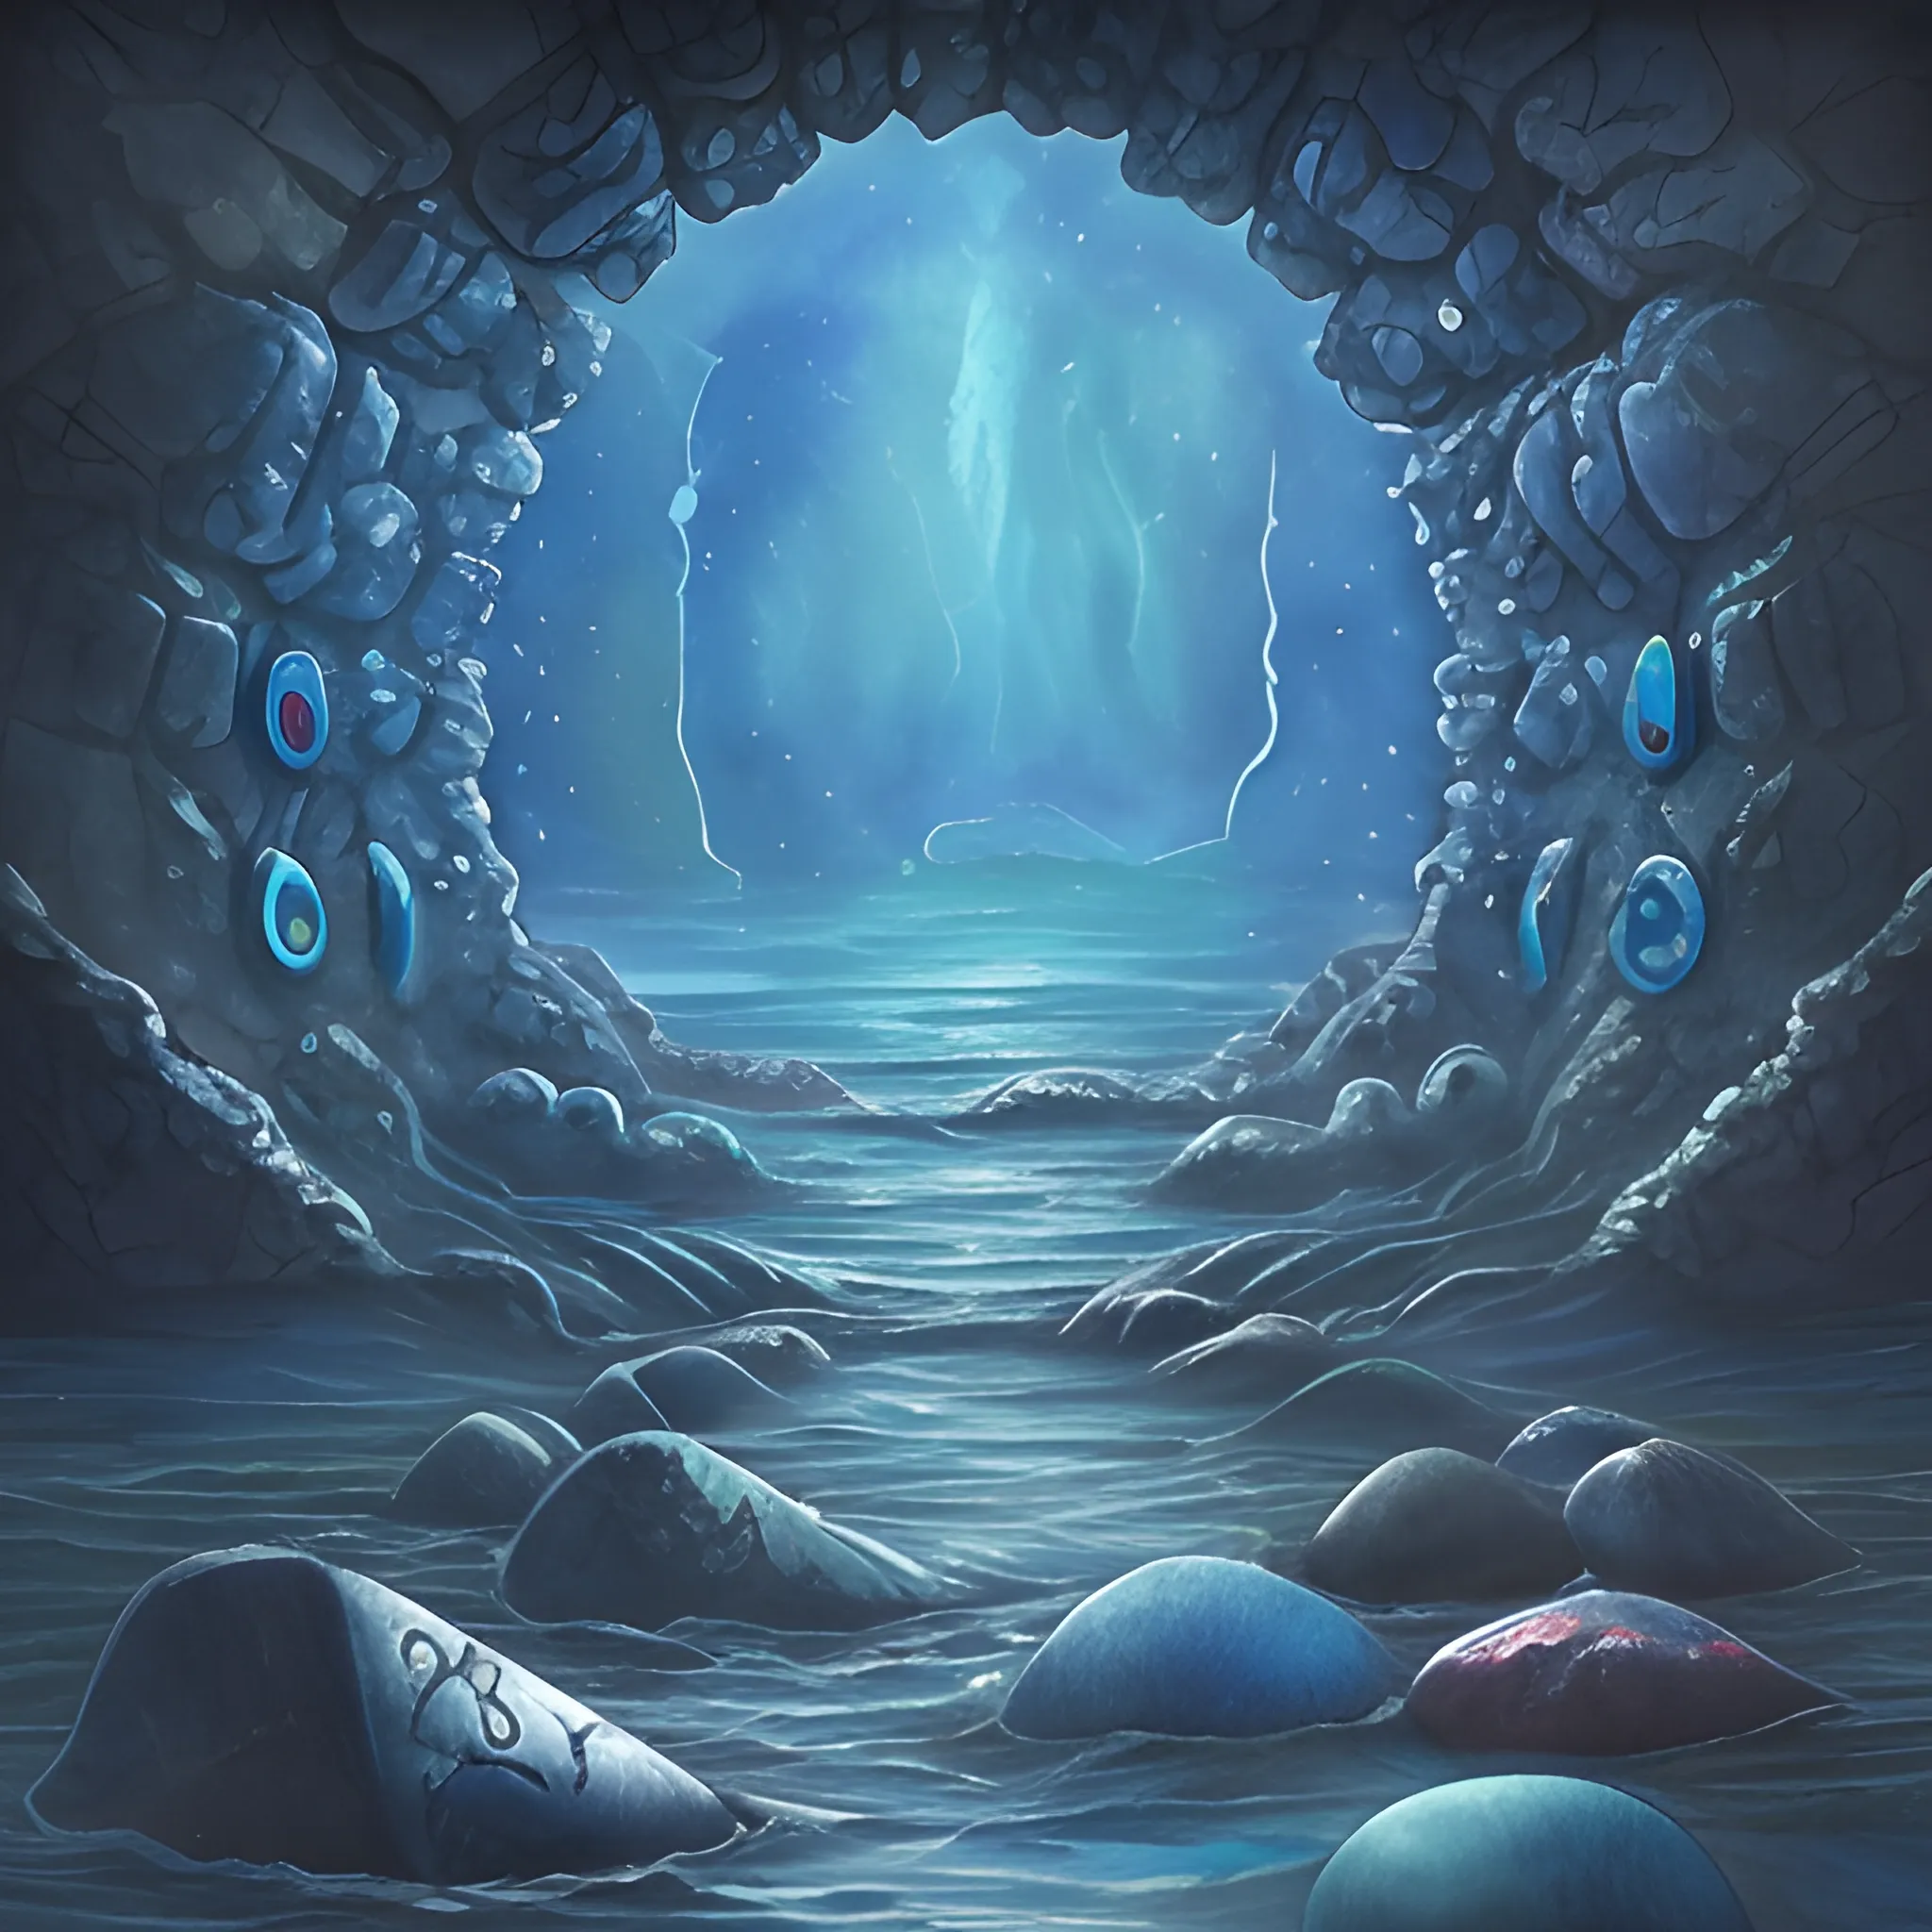 , Trippy, Water Color, abyssal water, dark blue, runic stones,
realistic water background, Atlantide